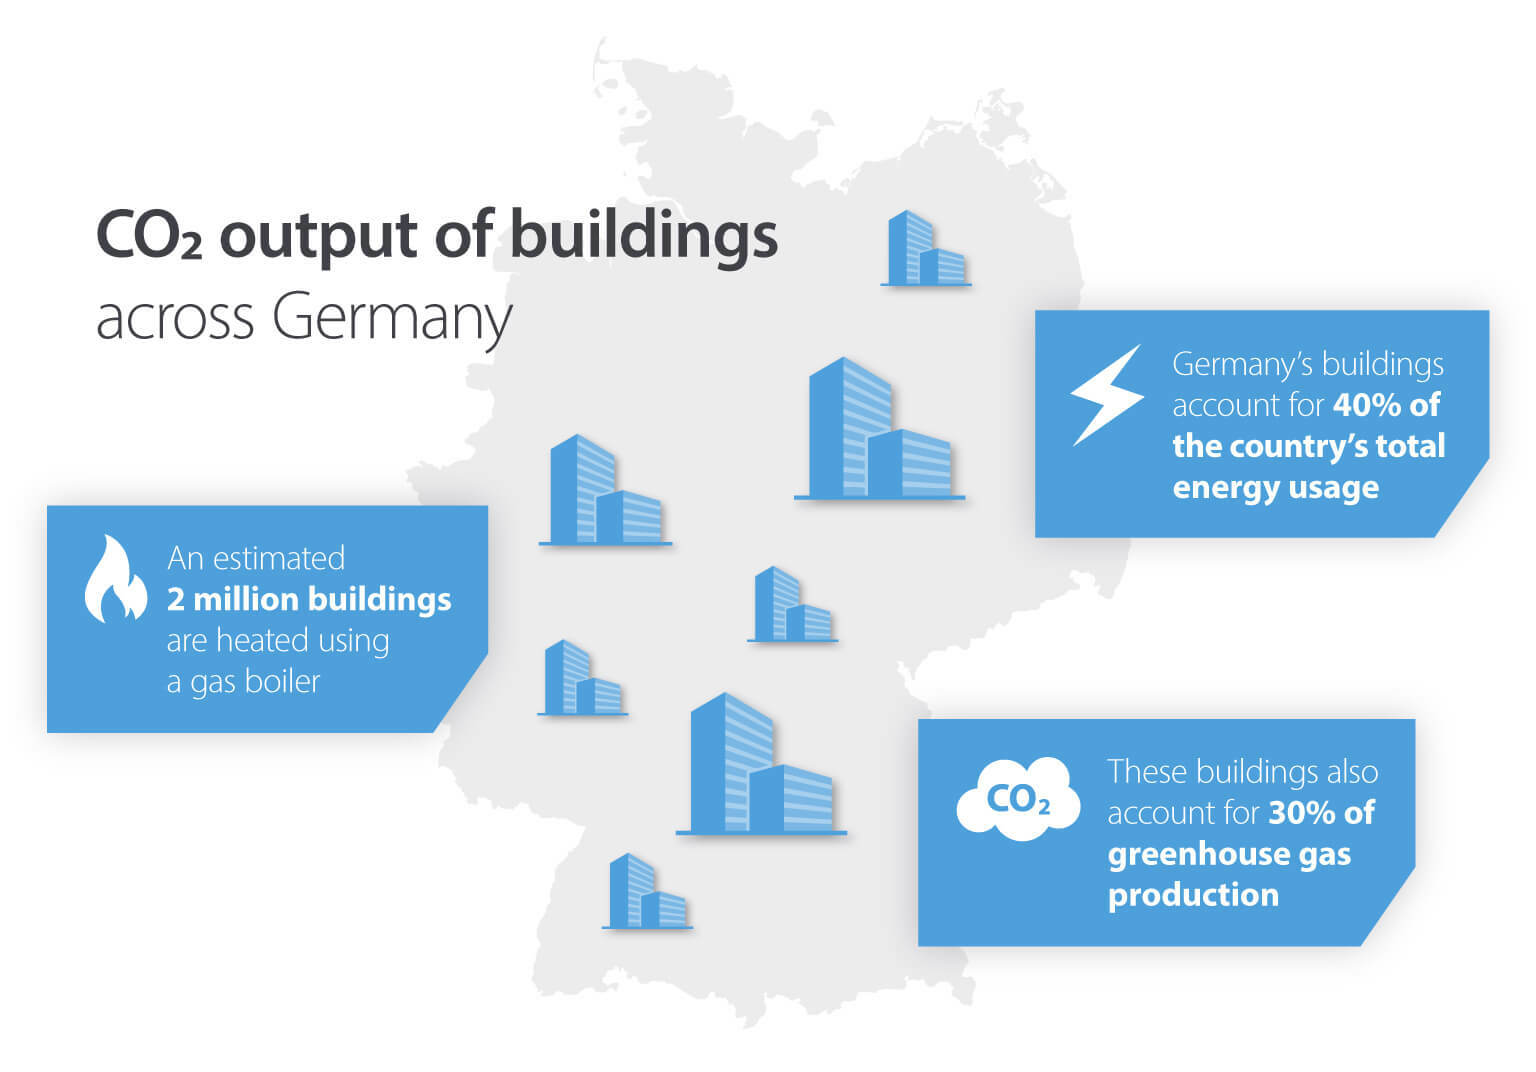 CO2 output of buildings in Germany